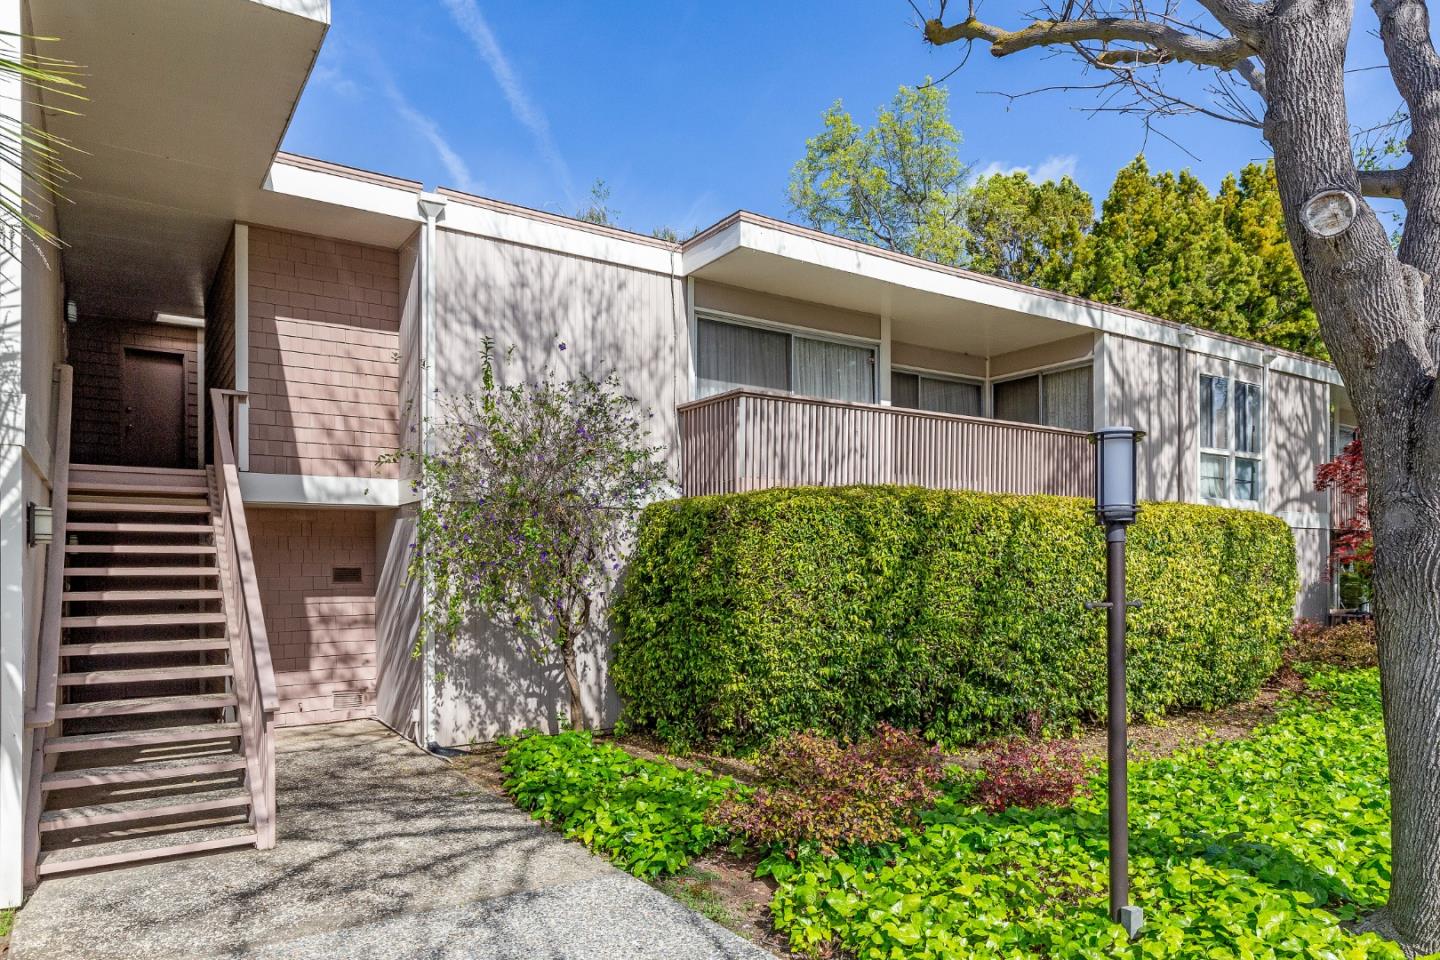 Photo of 280 Easy St #105 in Mountain View, CA